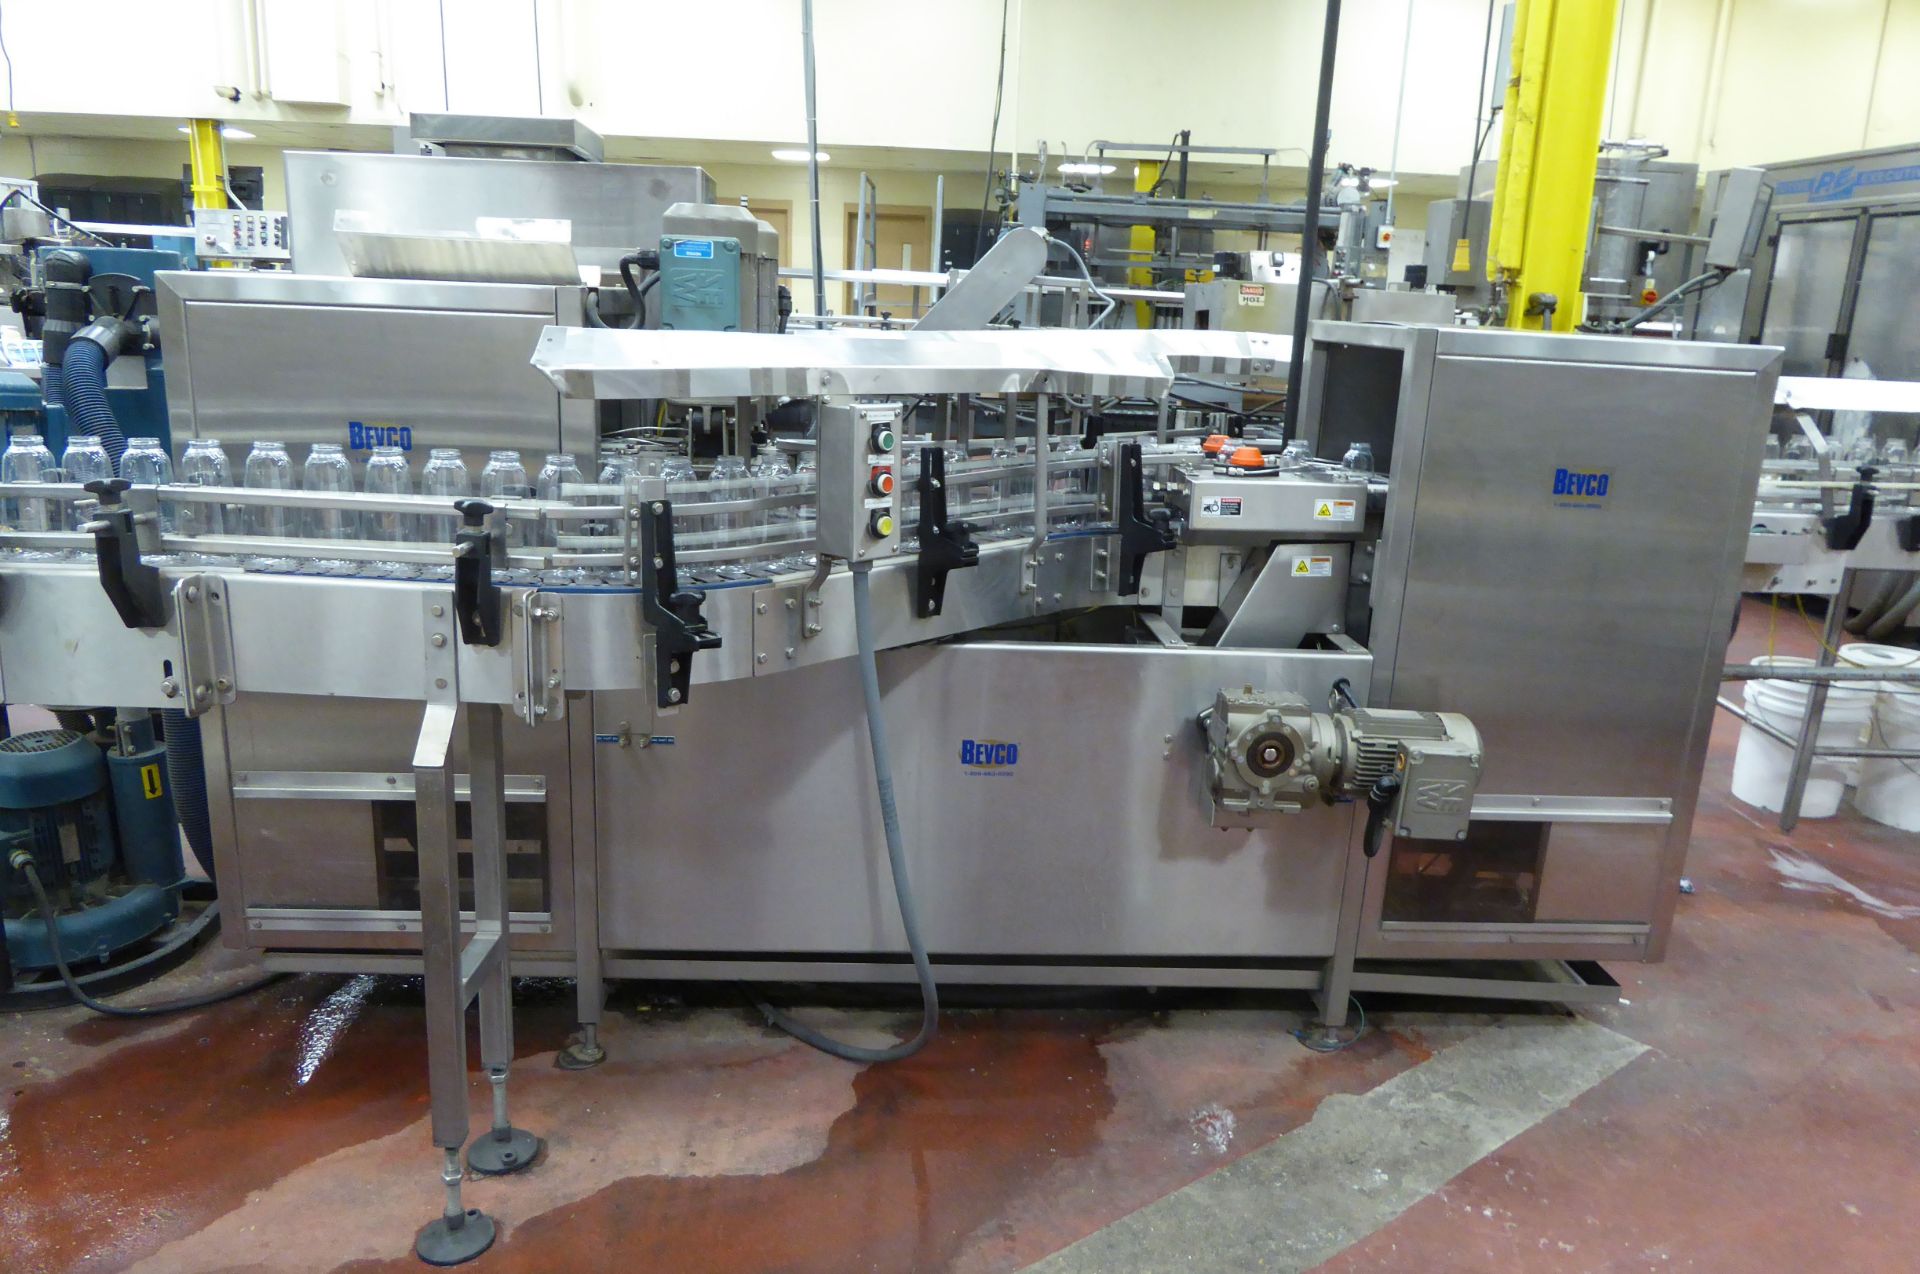 Bevco S/S Bottle Gripper Rinser, Model M150, SN J0156, with (2) Sew Gear Reducing Drives **Rigging